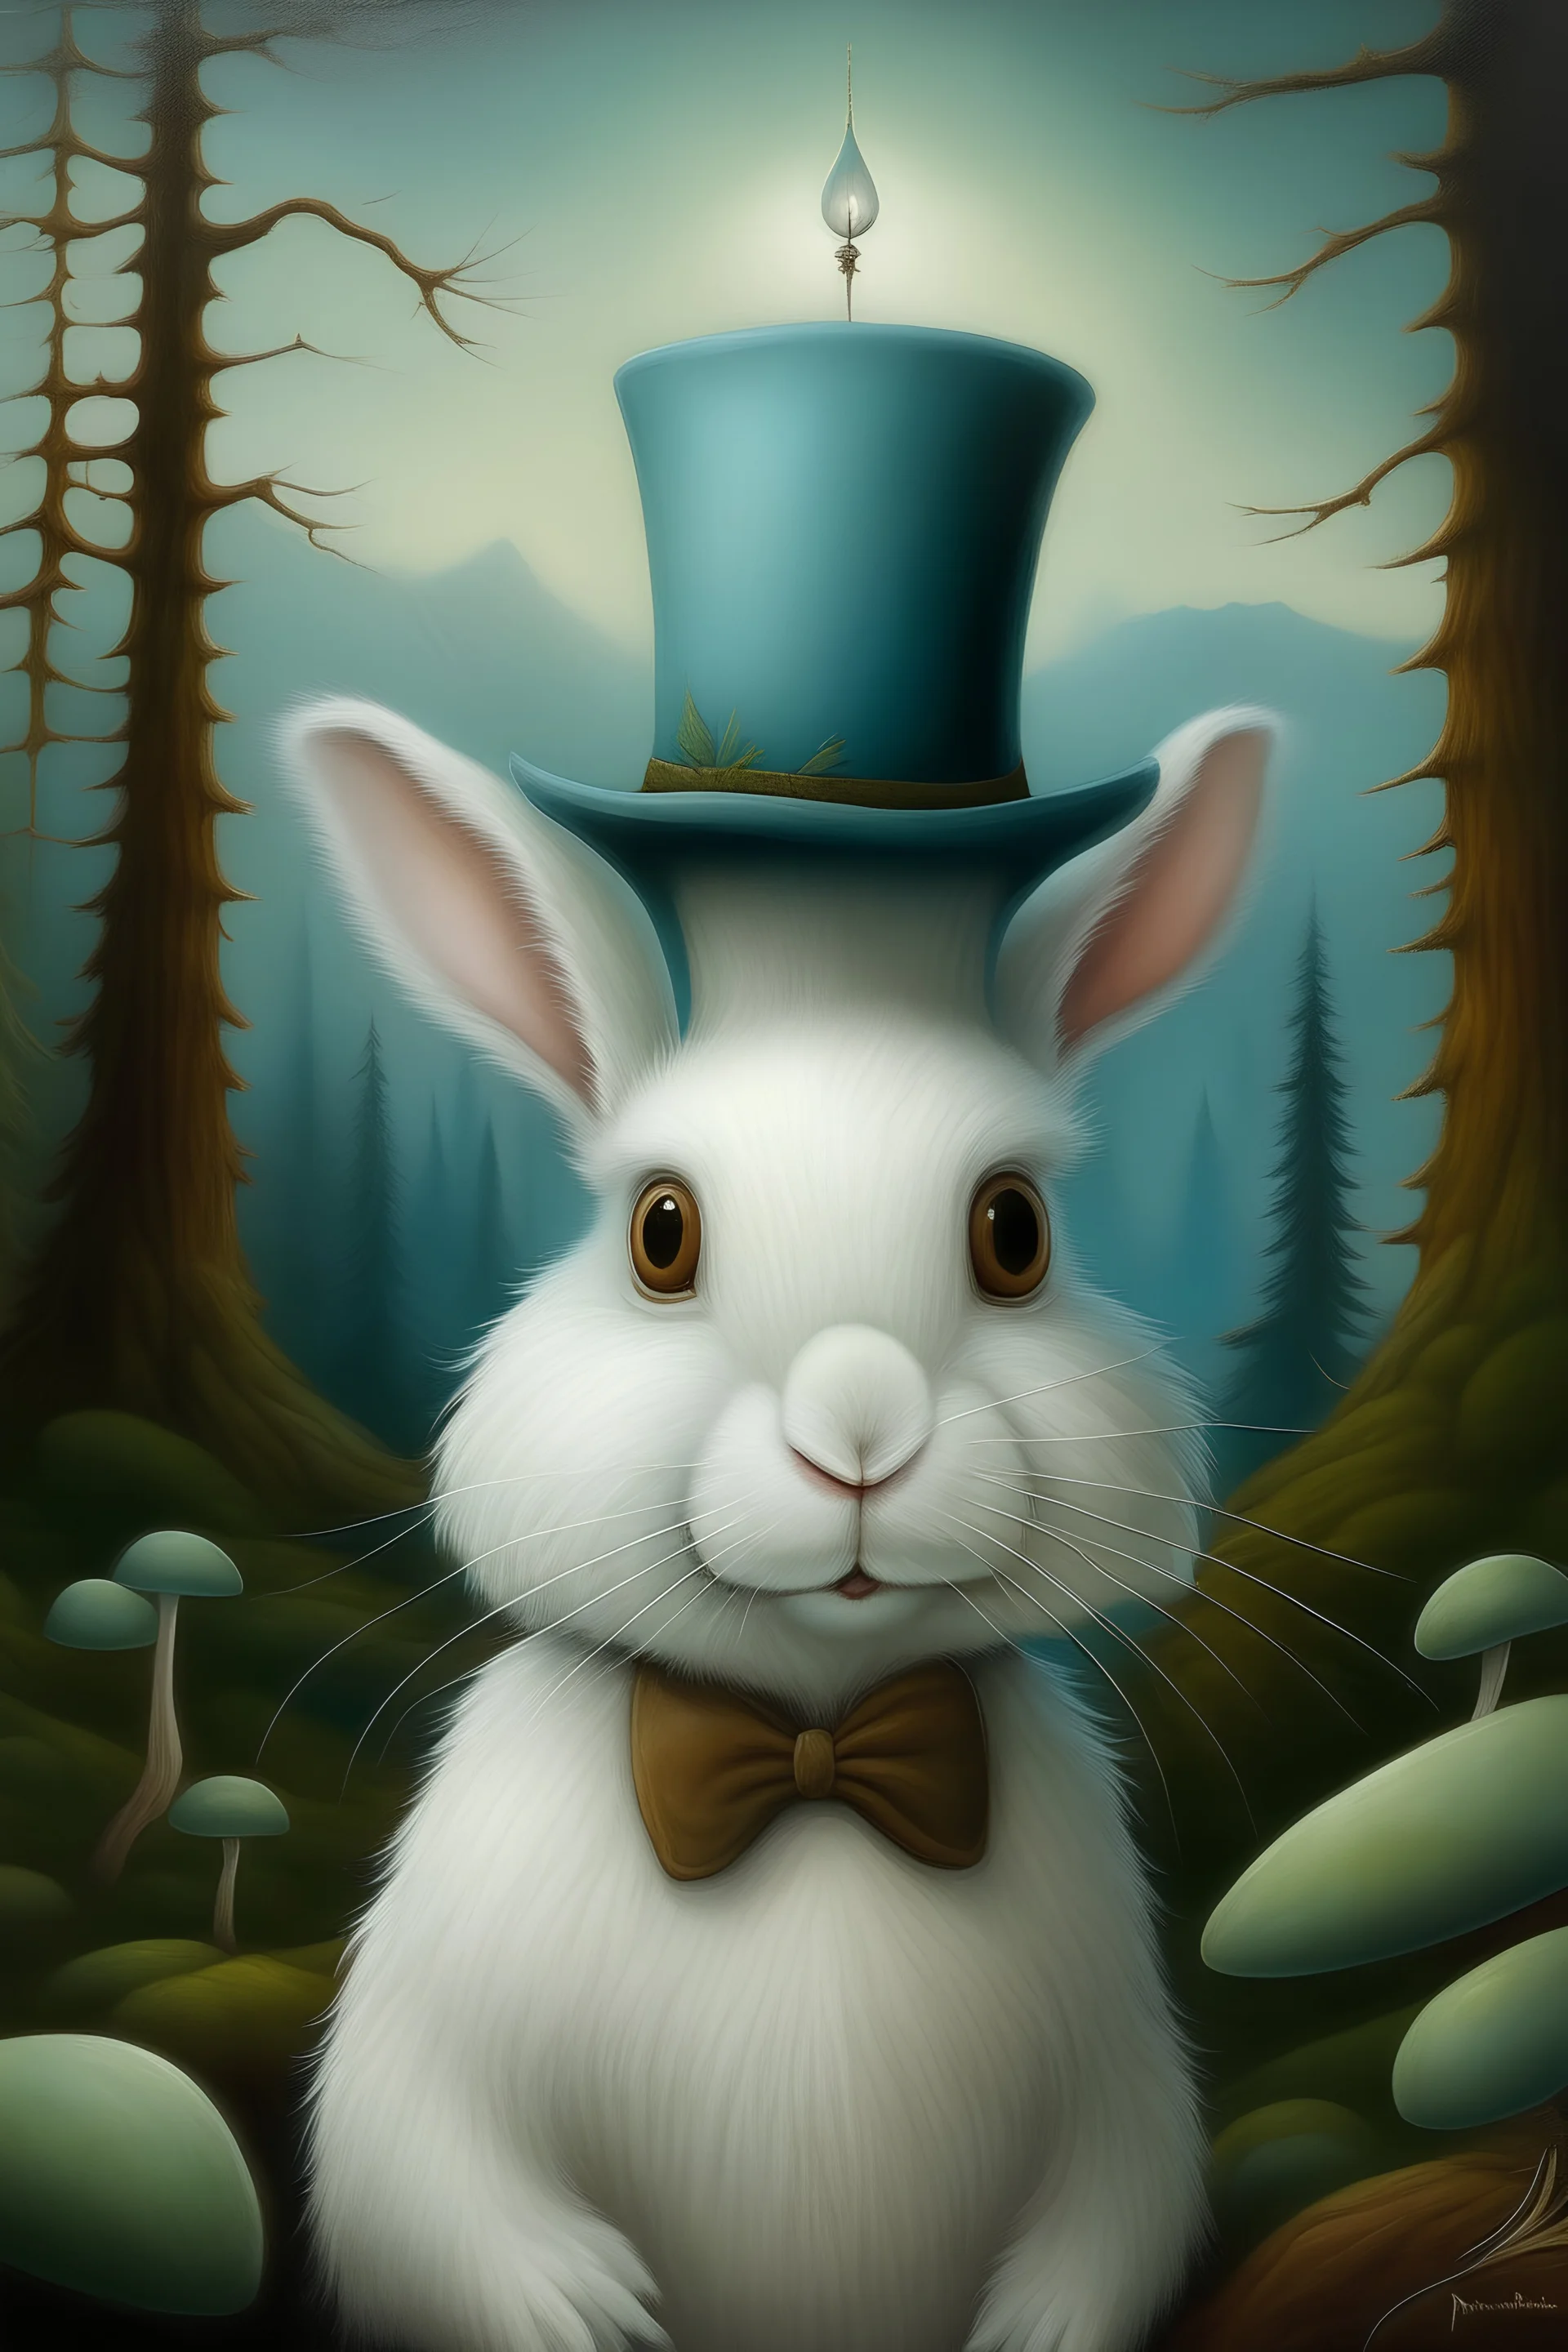 photorealistic Cute fantasy white snowshoe hare wearing a top hat; big pine trees all around; in the style of Steve McCurry